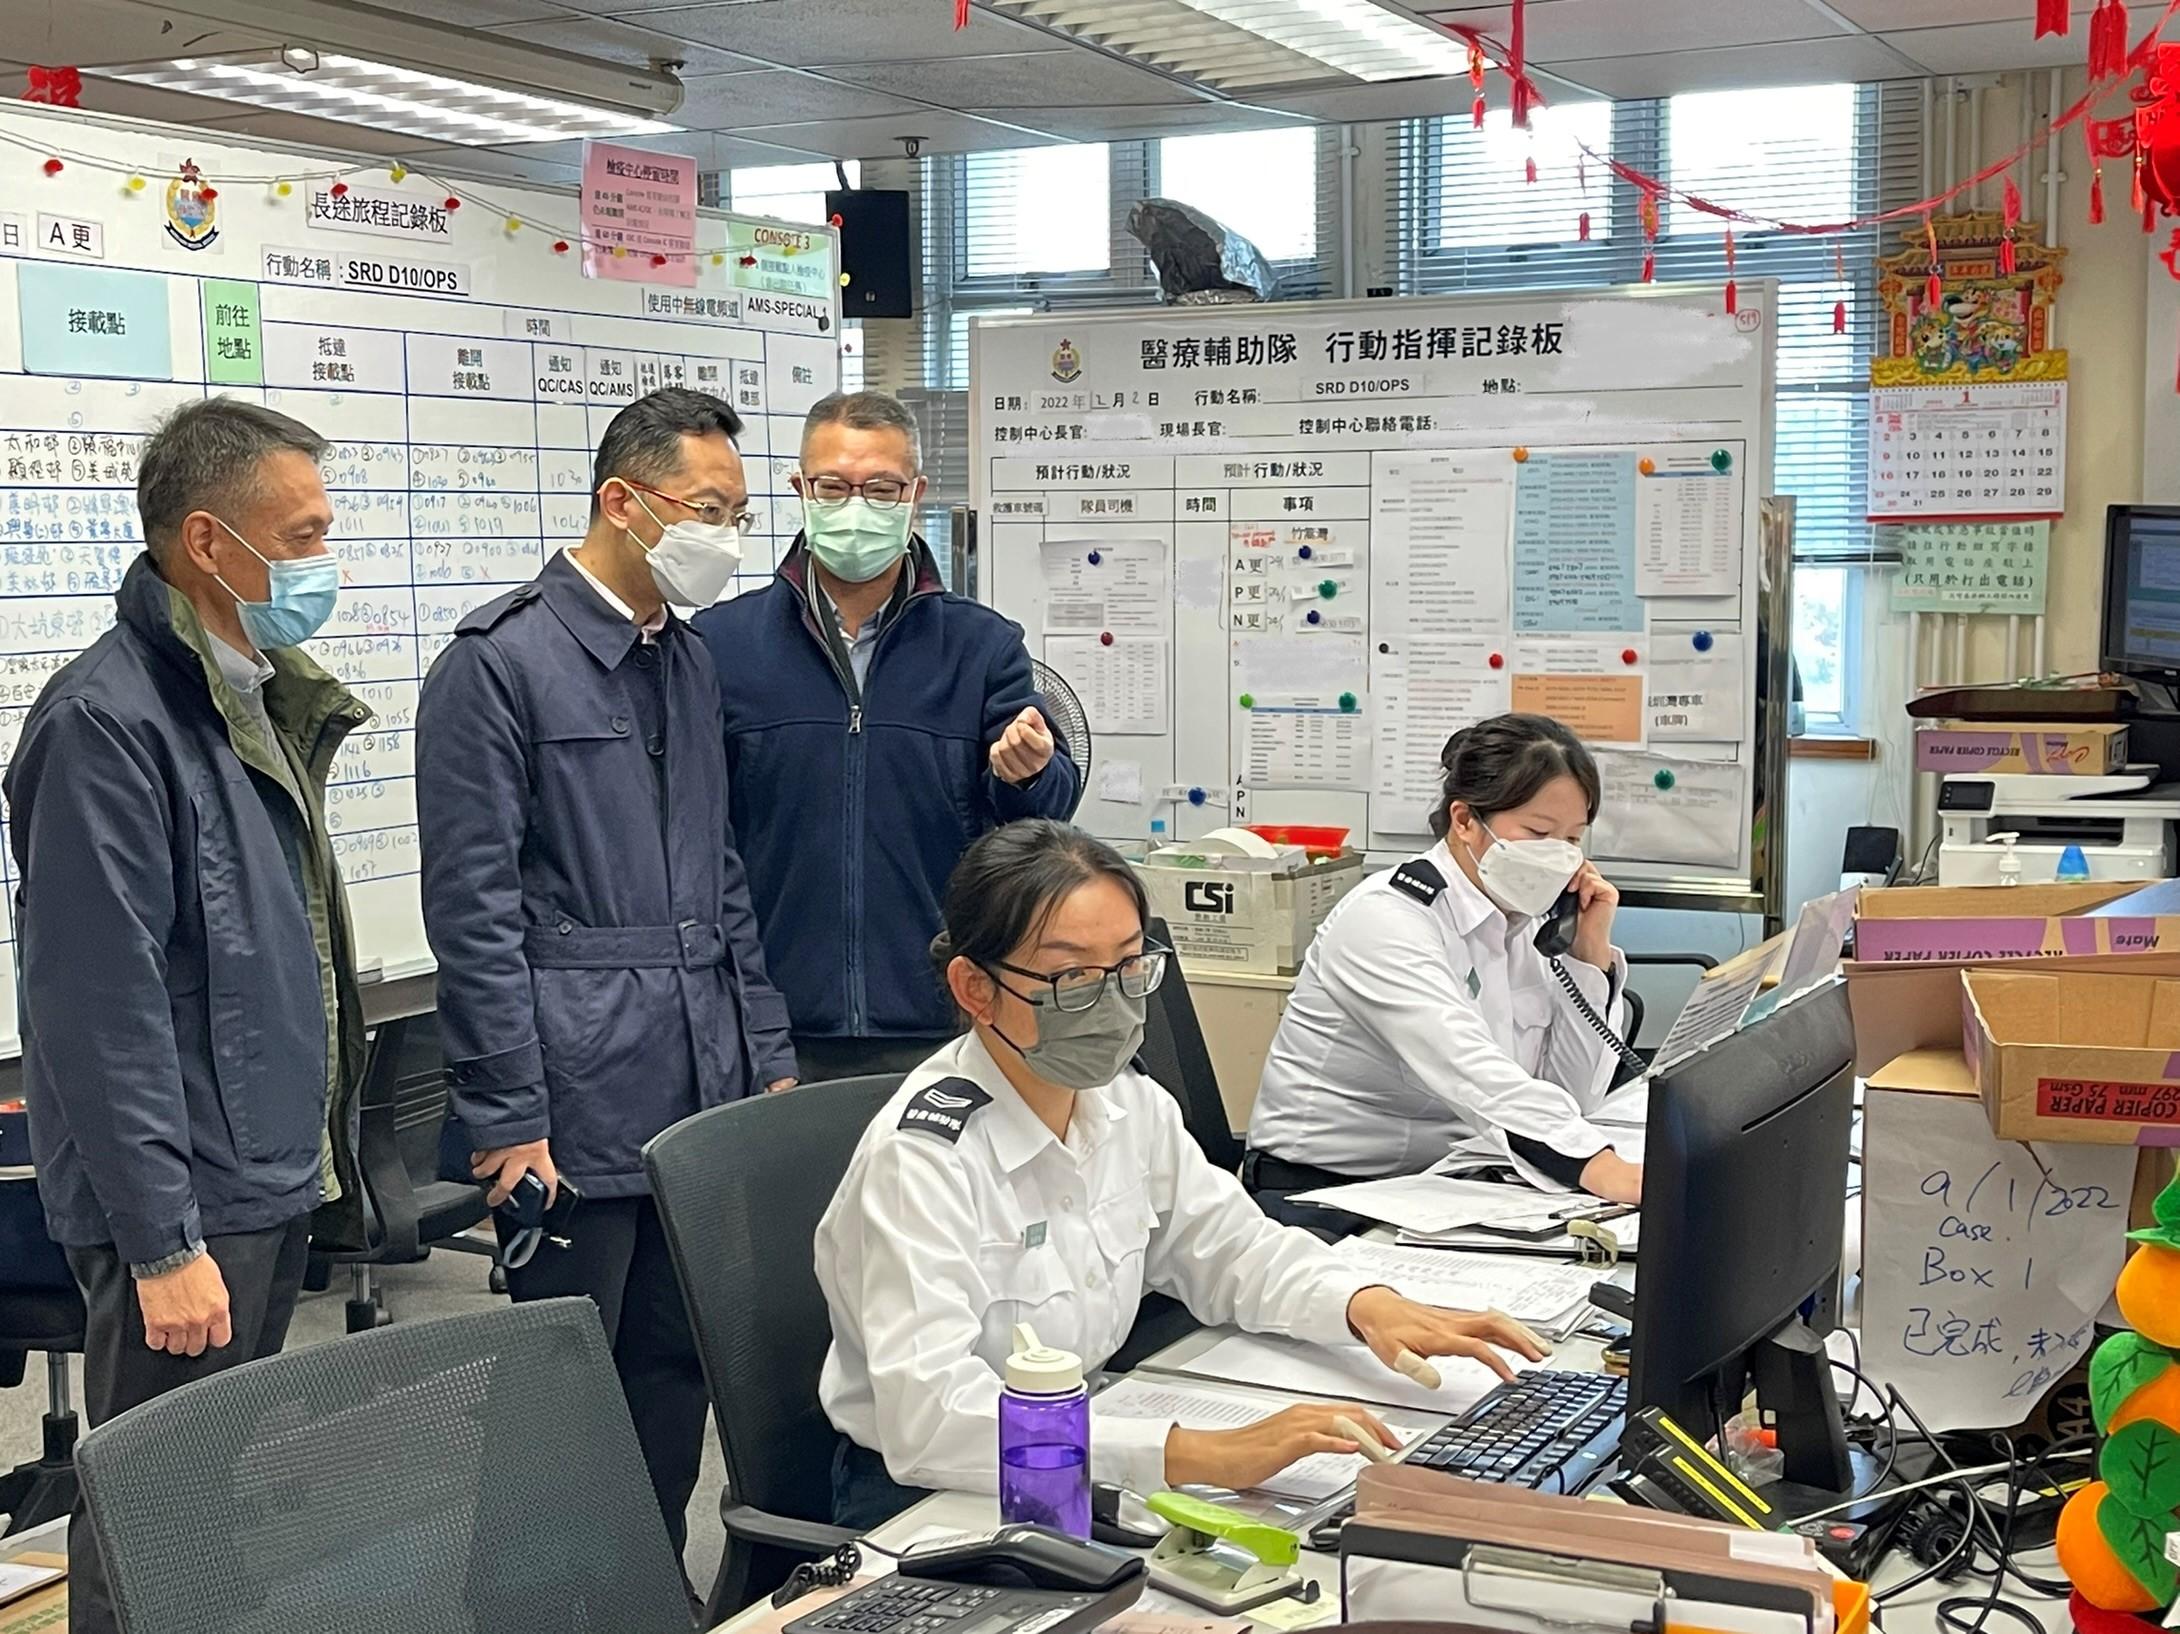 The Commissioner of the Auxiliary Medical Service (AMS), Dr Ronald Lam, today (February 2) visited colleagues on duty at the AMS Headquarters in Ho Man Tin. Photo shows the Chief Staff Officer of the AMS, Mr Wong Ying-keung (third left), briefing Dr Lam (second left) the daily operation of the control room.